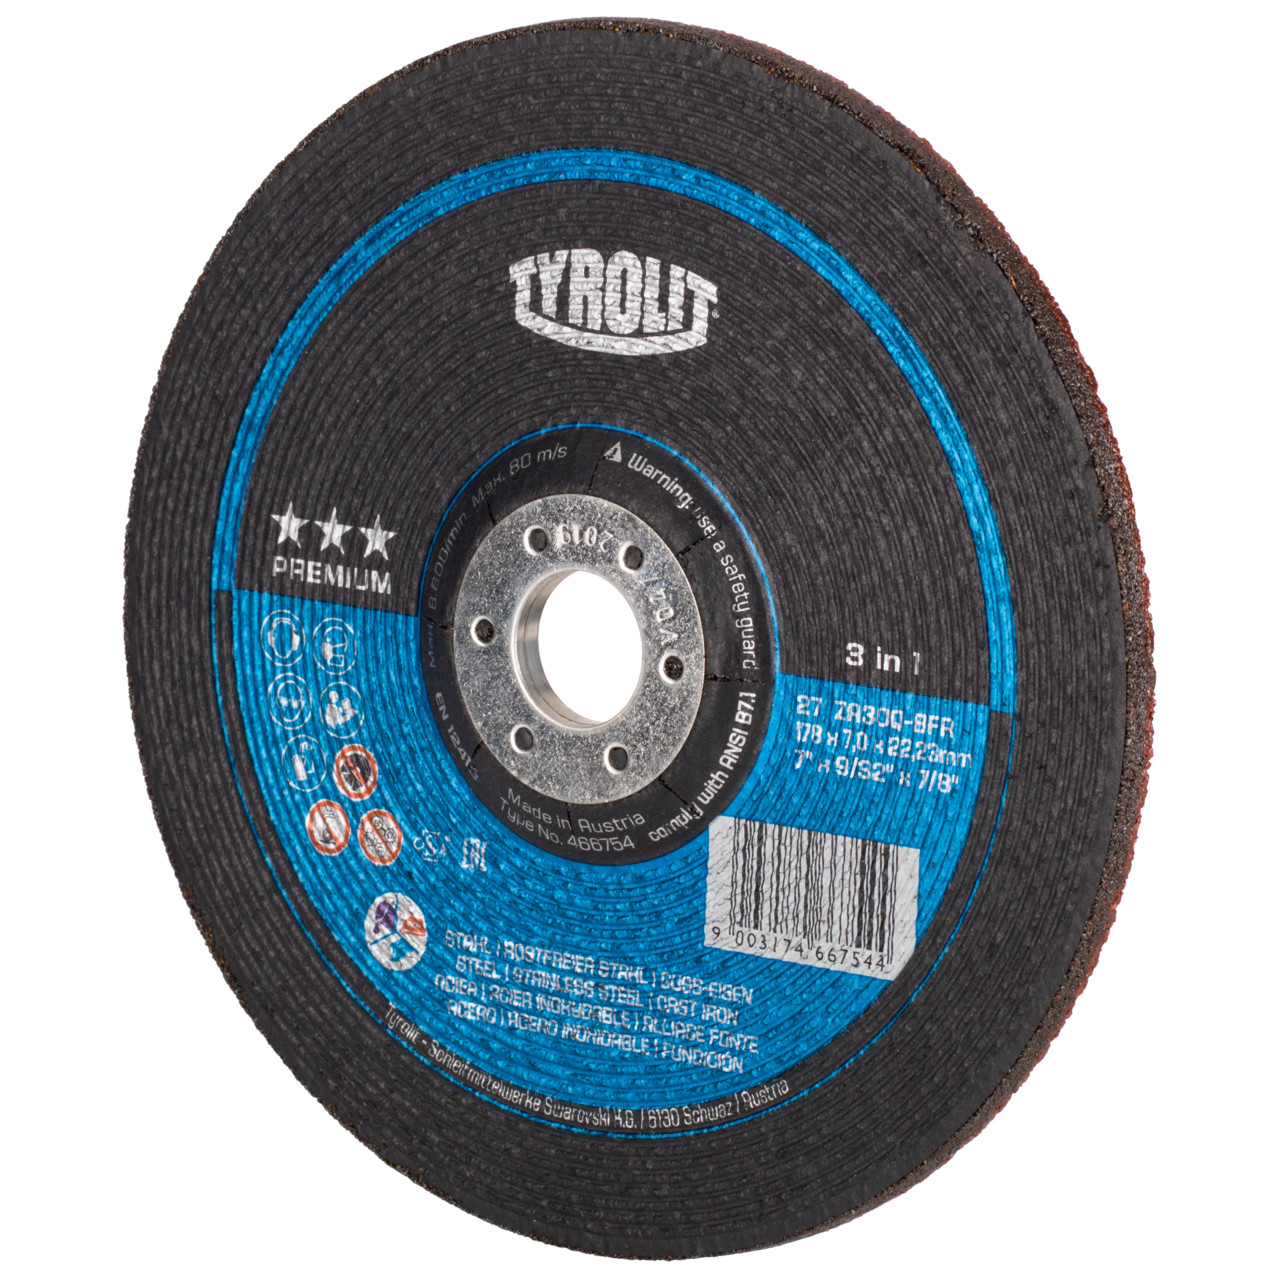 TYROLIT grinding disc DxUxH 230x7x22.23 3in1 for steel and stainless steel and cast iron, shape: 27 - offset version, Art. 466762